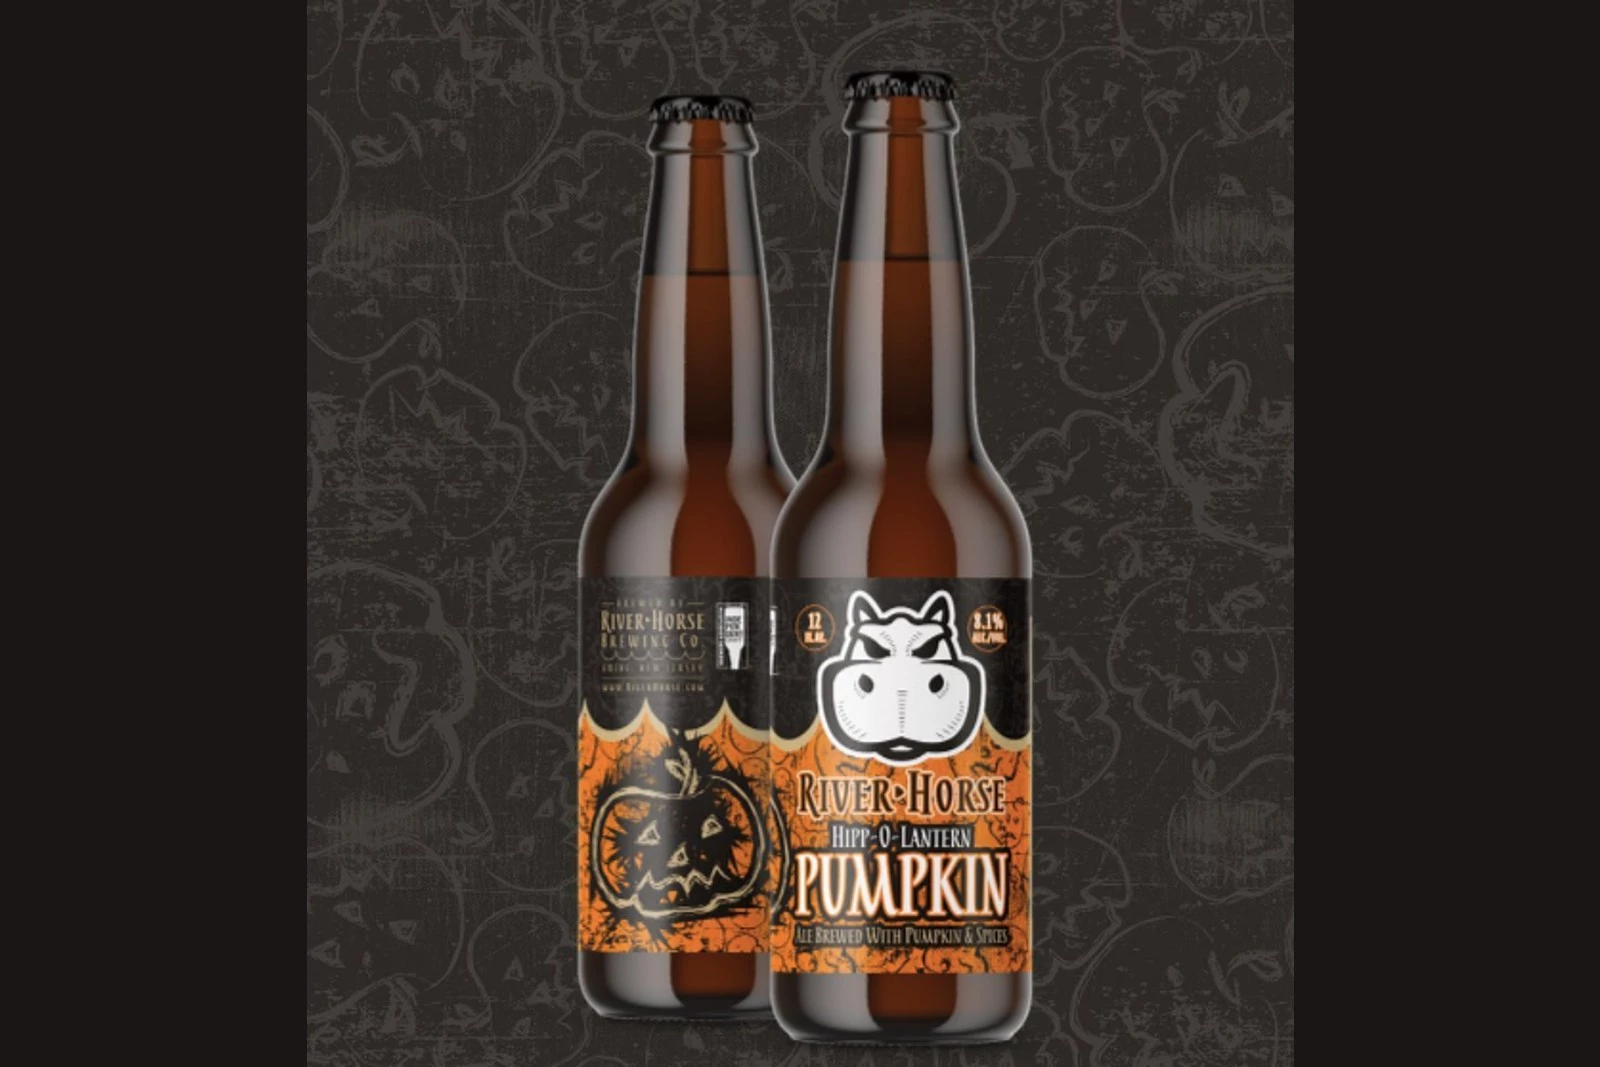 Riverhorse Brewing brew rated one of the best pumpkin beers pic